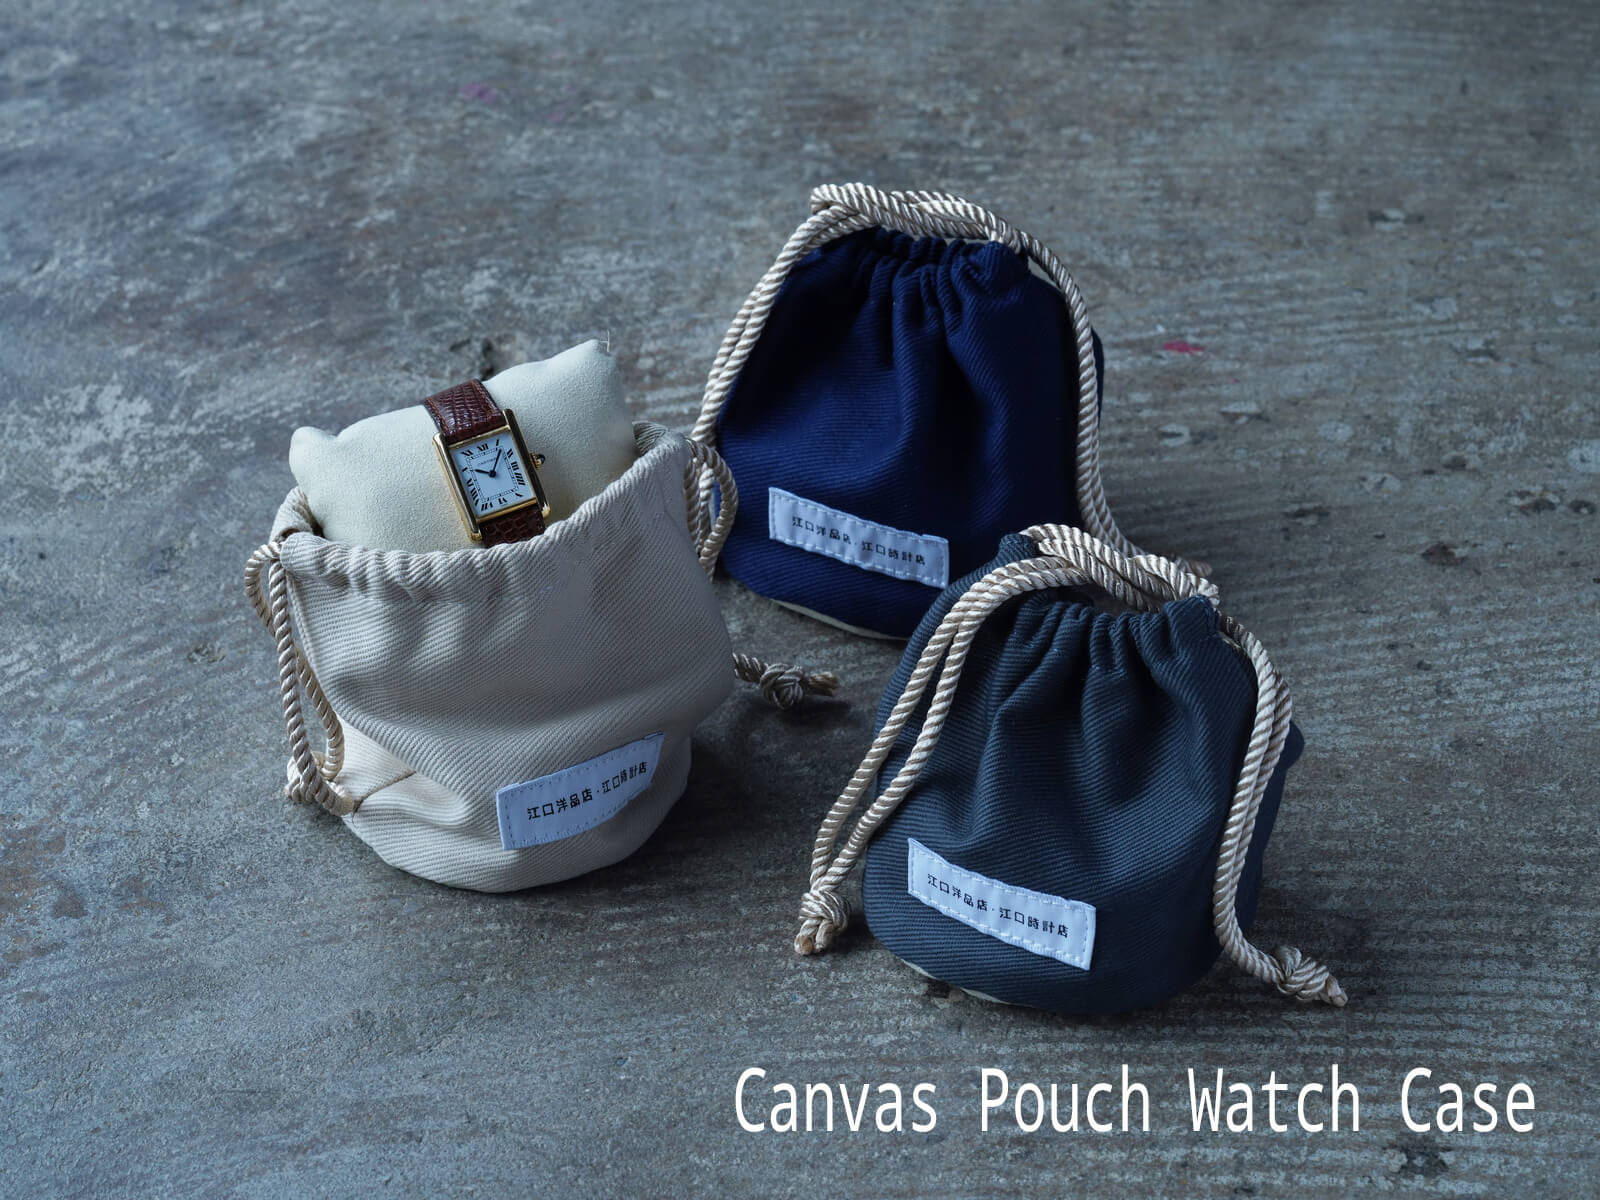 Canvas Pouch Watch Case について